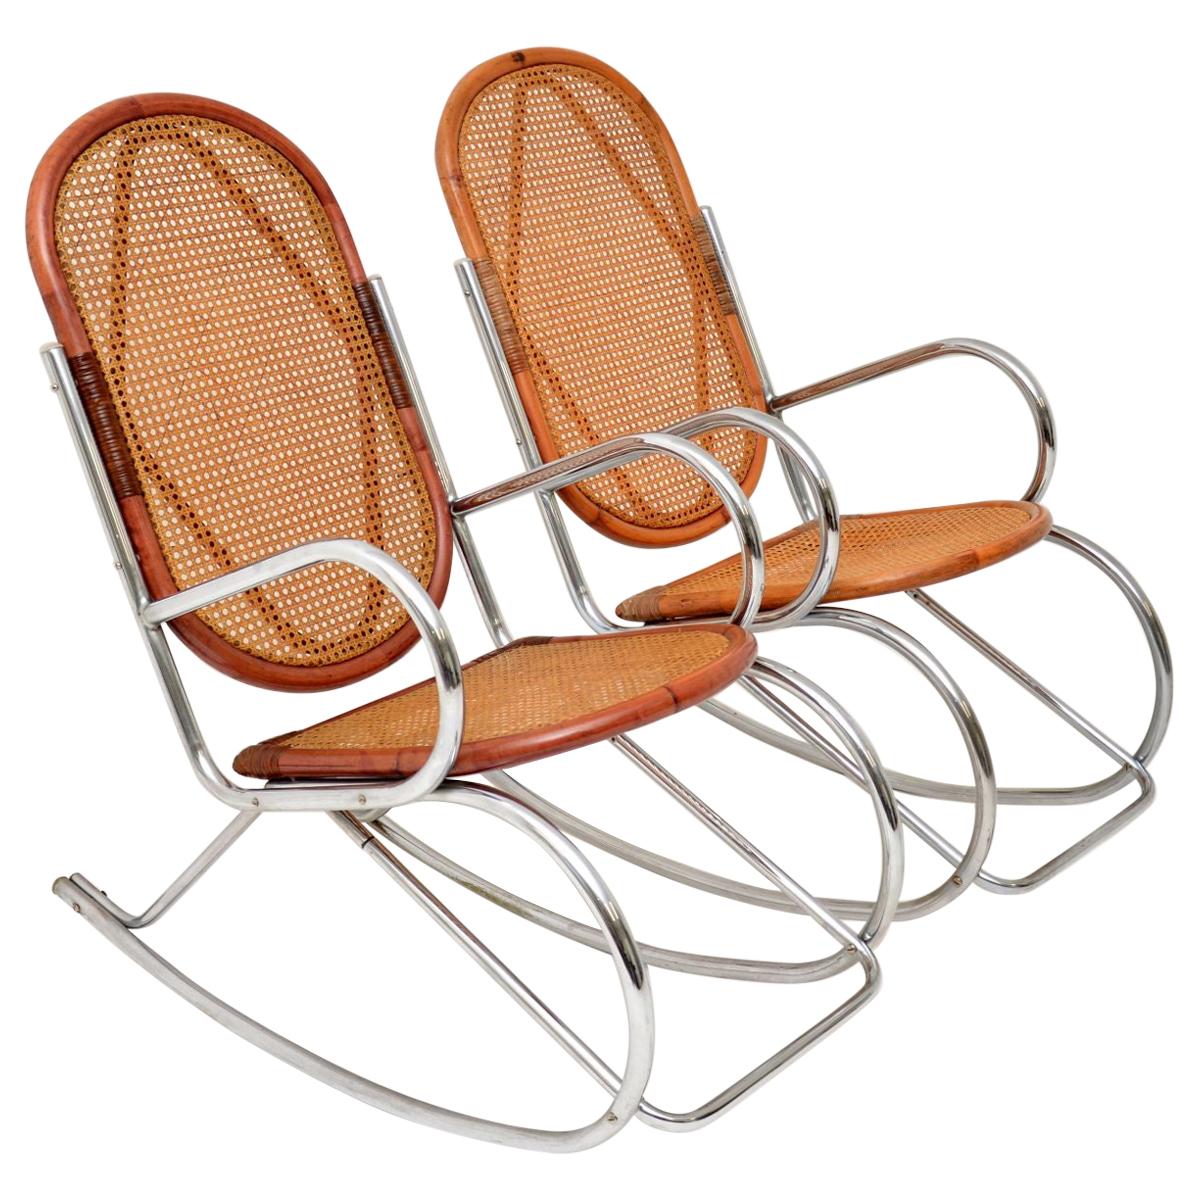 1970s Pair of Retro Chrome and Bamboo Rocking Chairs